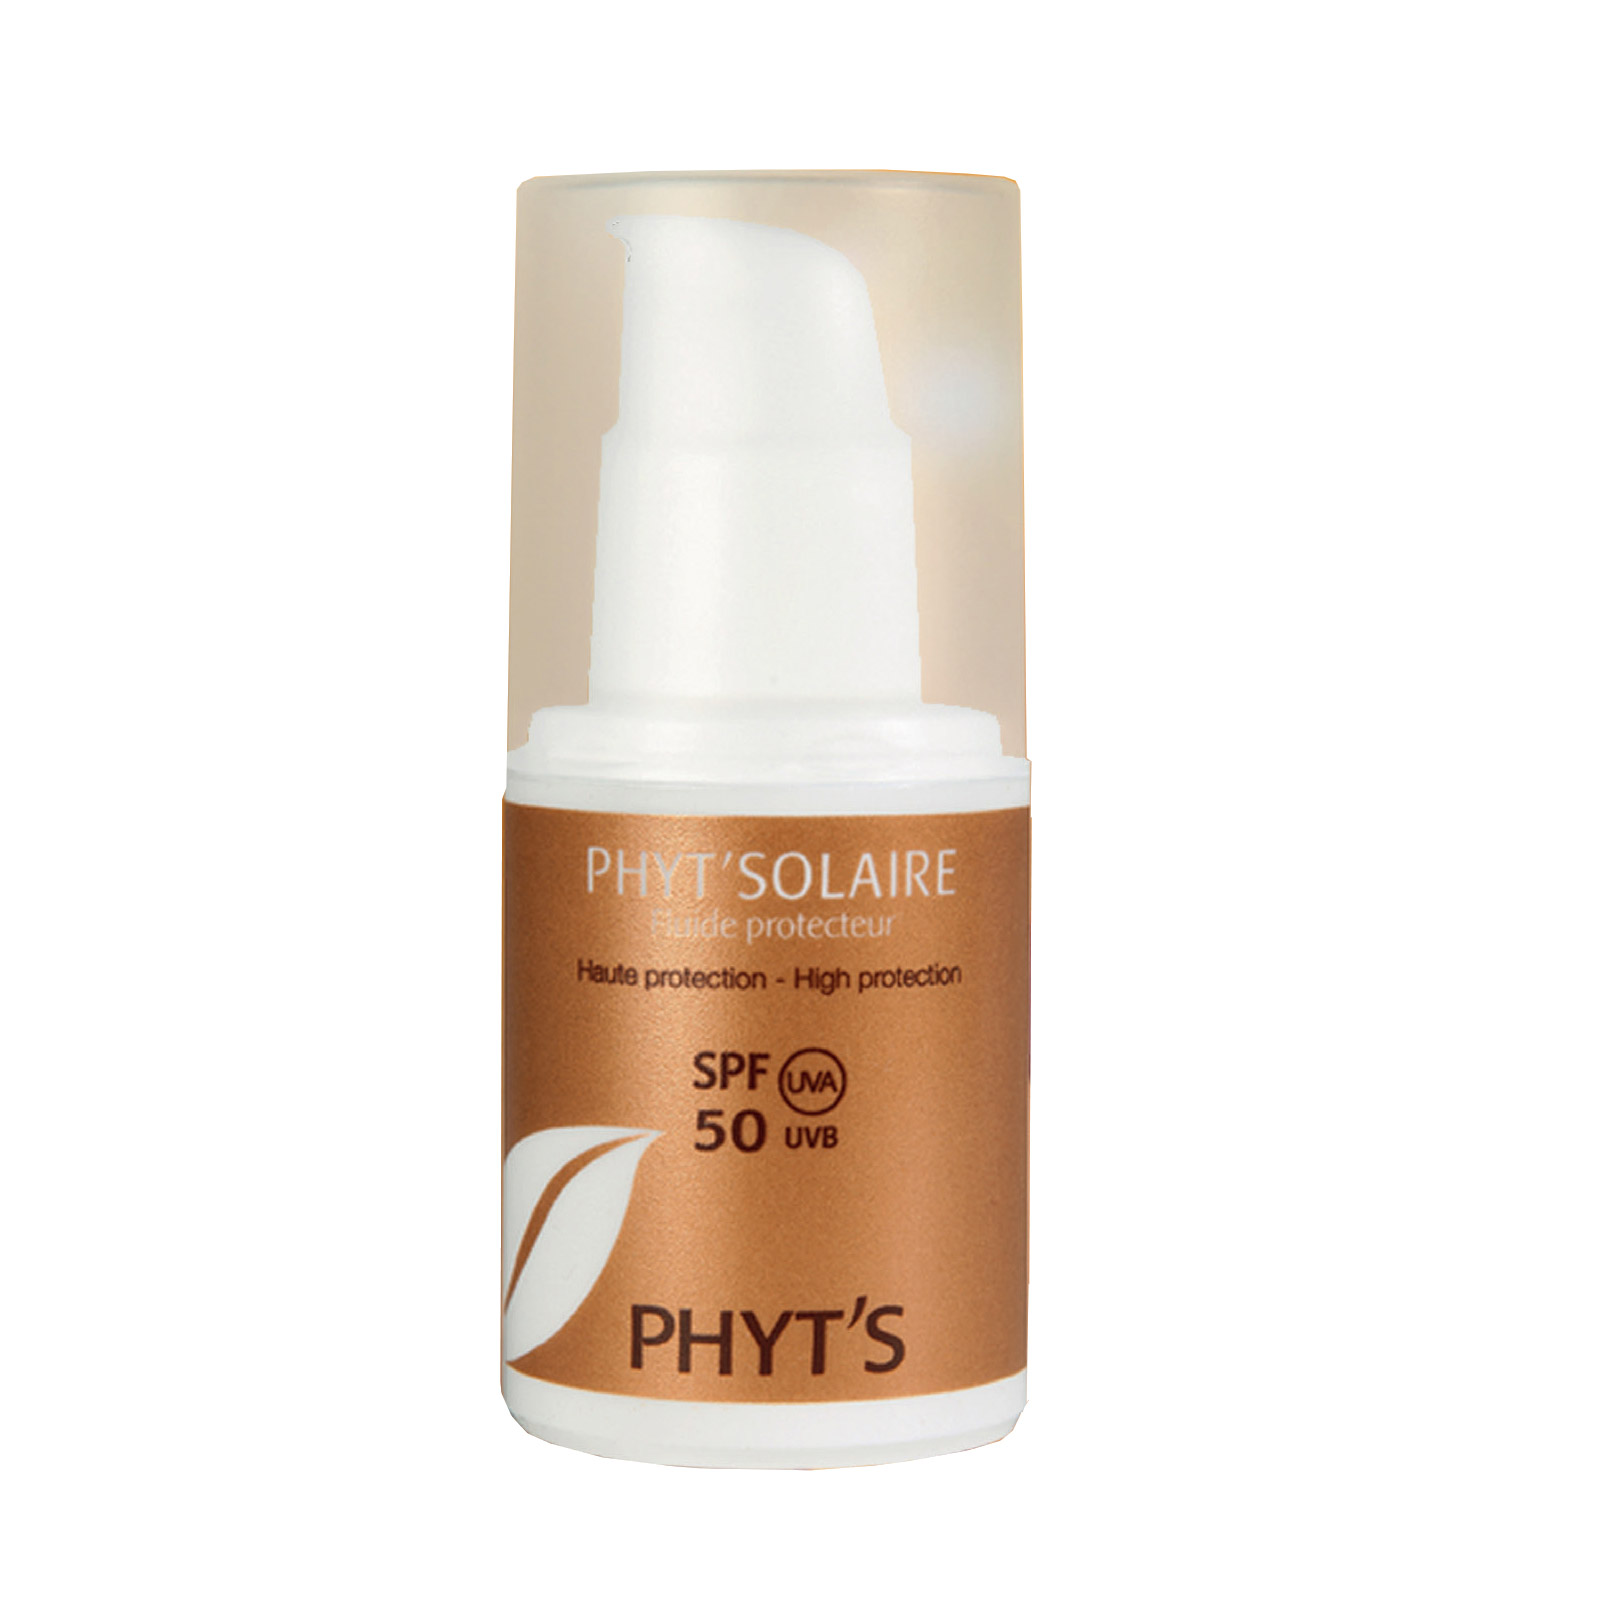 Phyts-solaire-50-spf.jpg